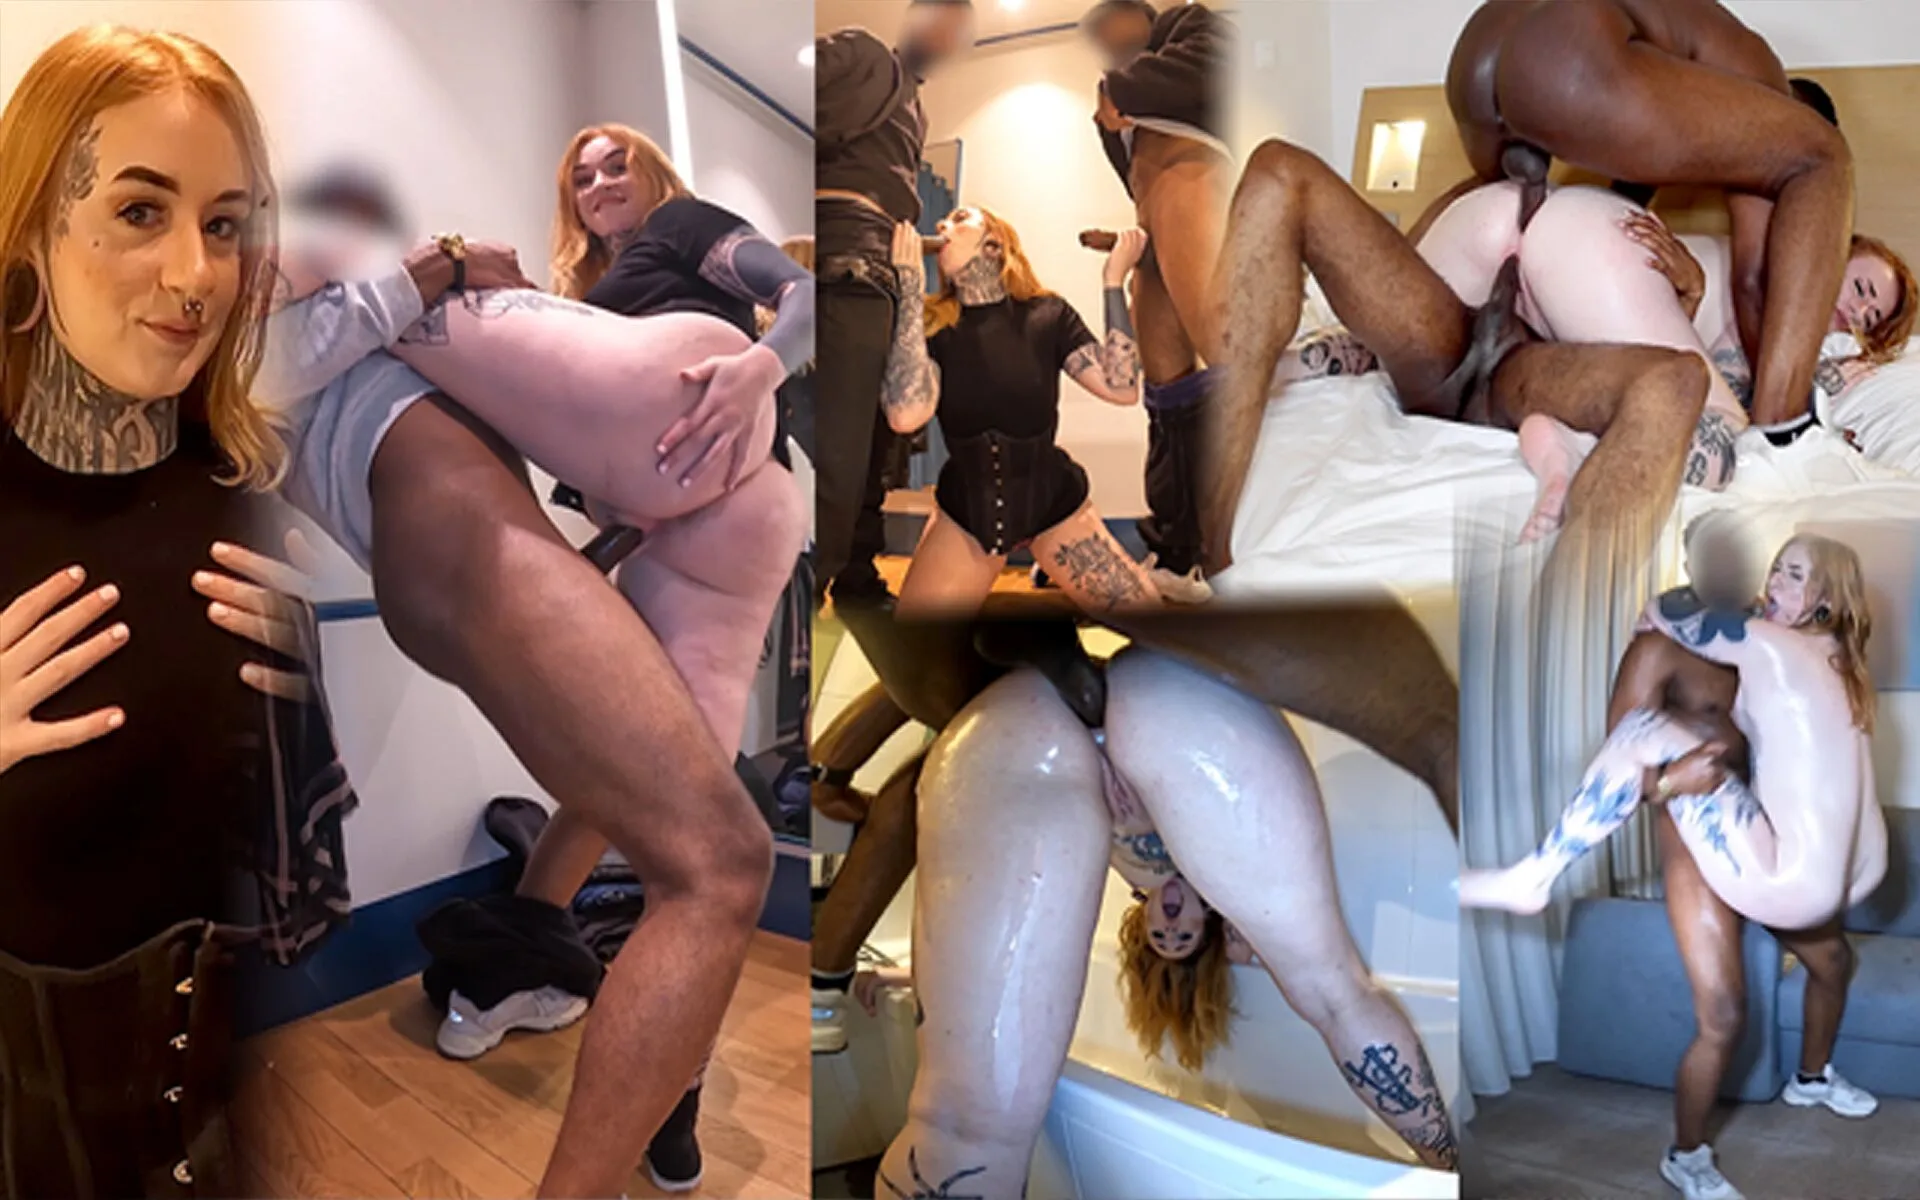 Big Ass British Student Gets Anal Fucked Hard in Fitting Room and Hotel Corridor by 2 Strangers!!! by Reels plans Faphouse photo